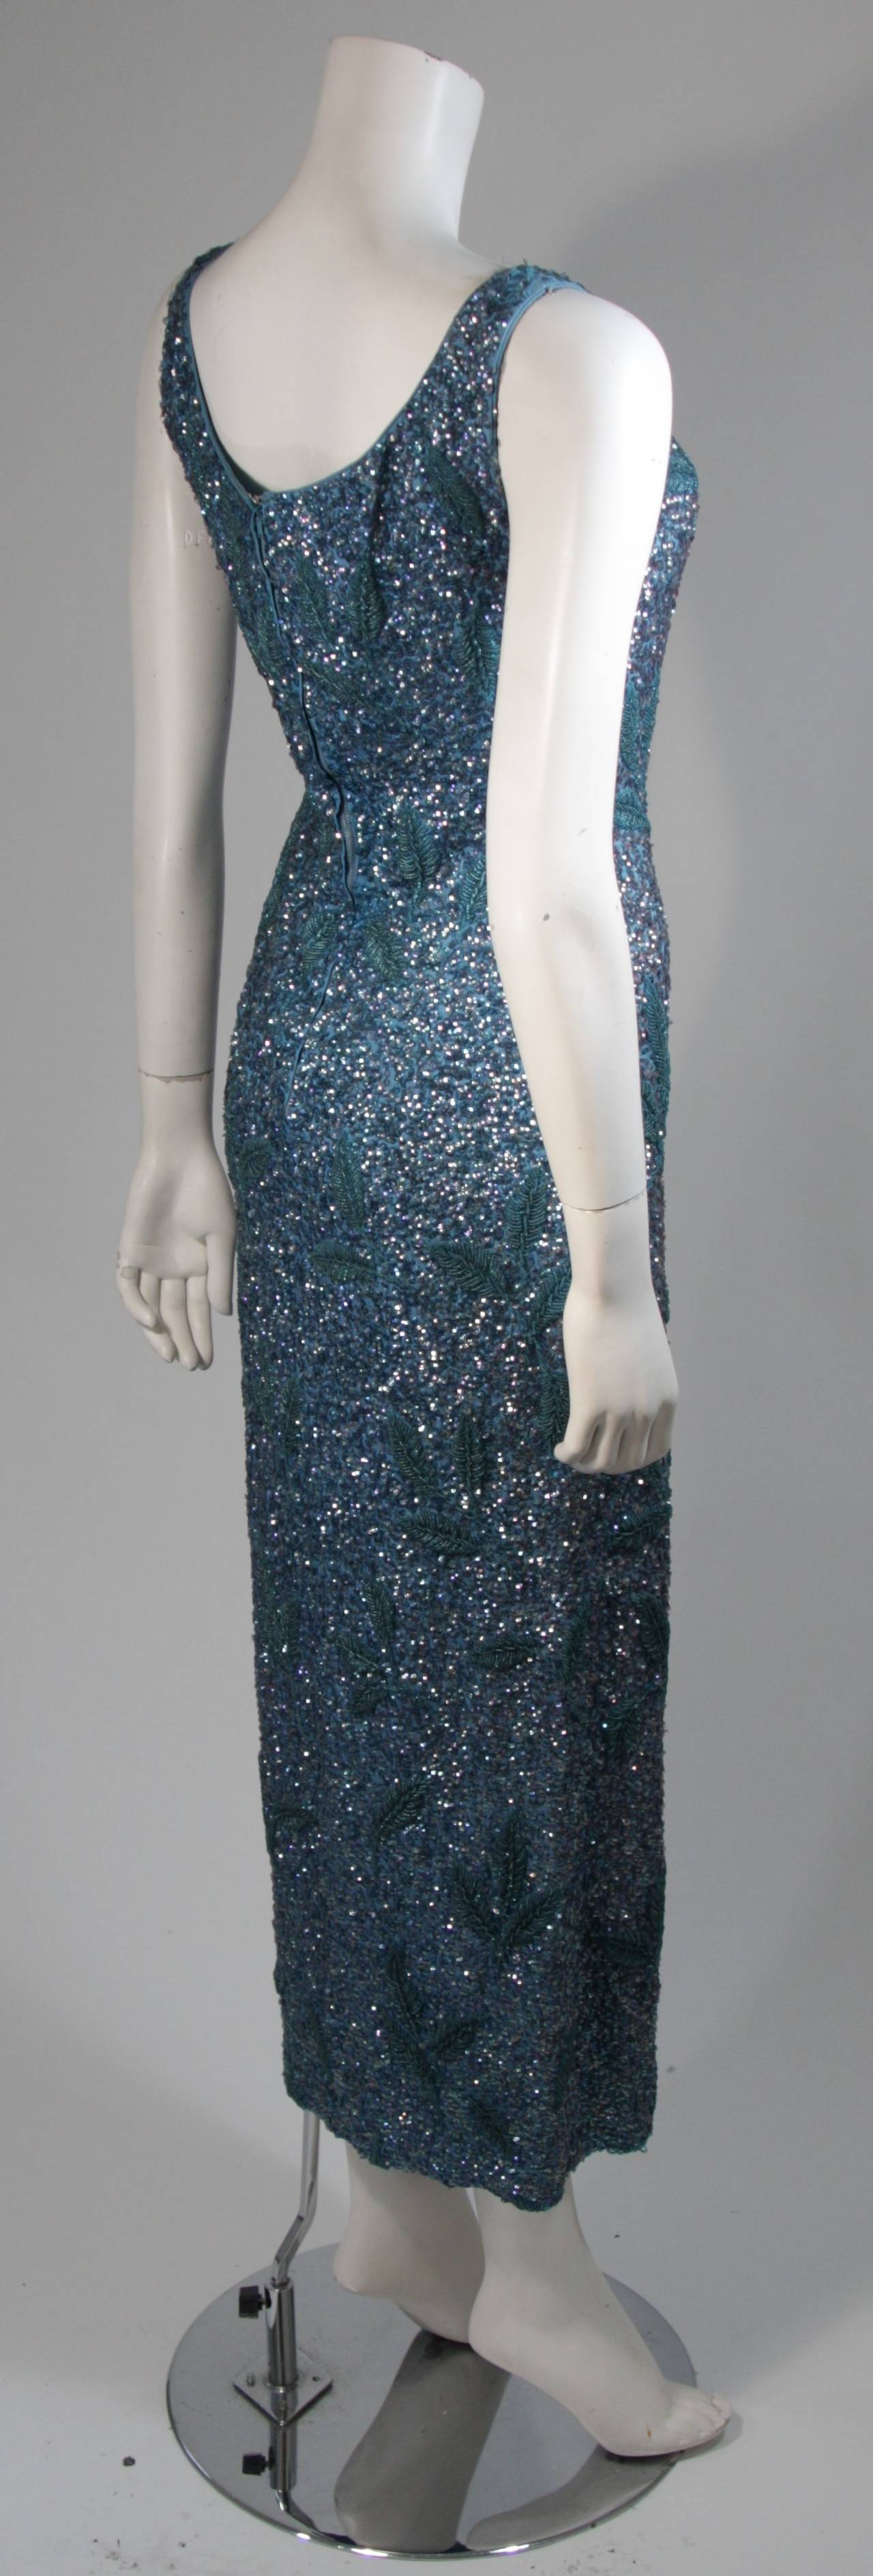 Custom 1960's Sapphire Blue Beaded Gown with Sequins Size Small Medium For Sale 2